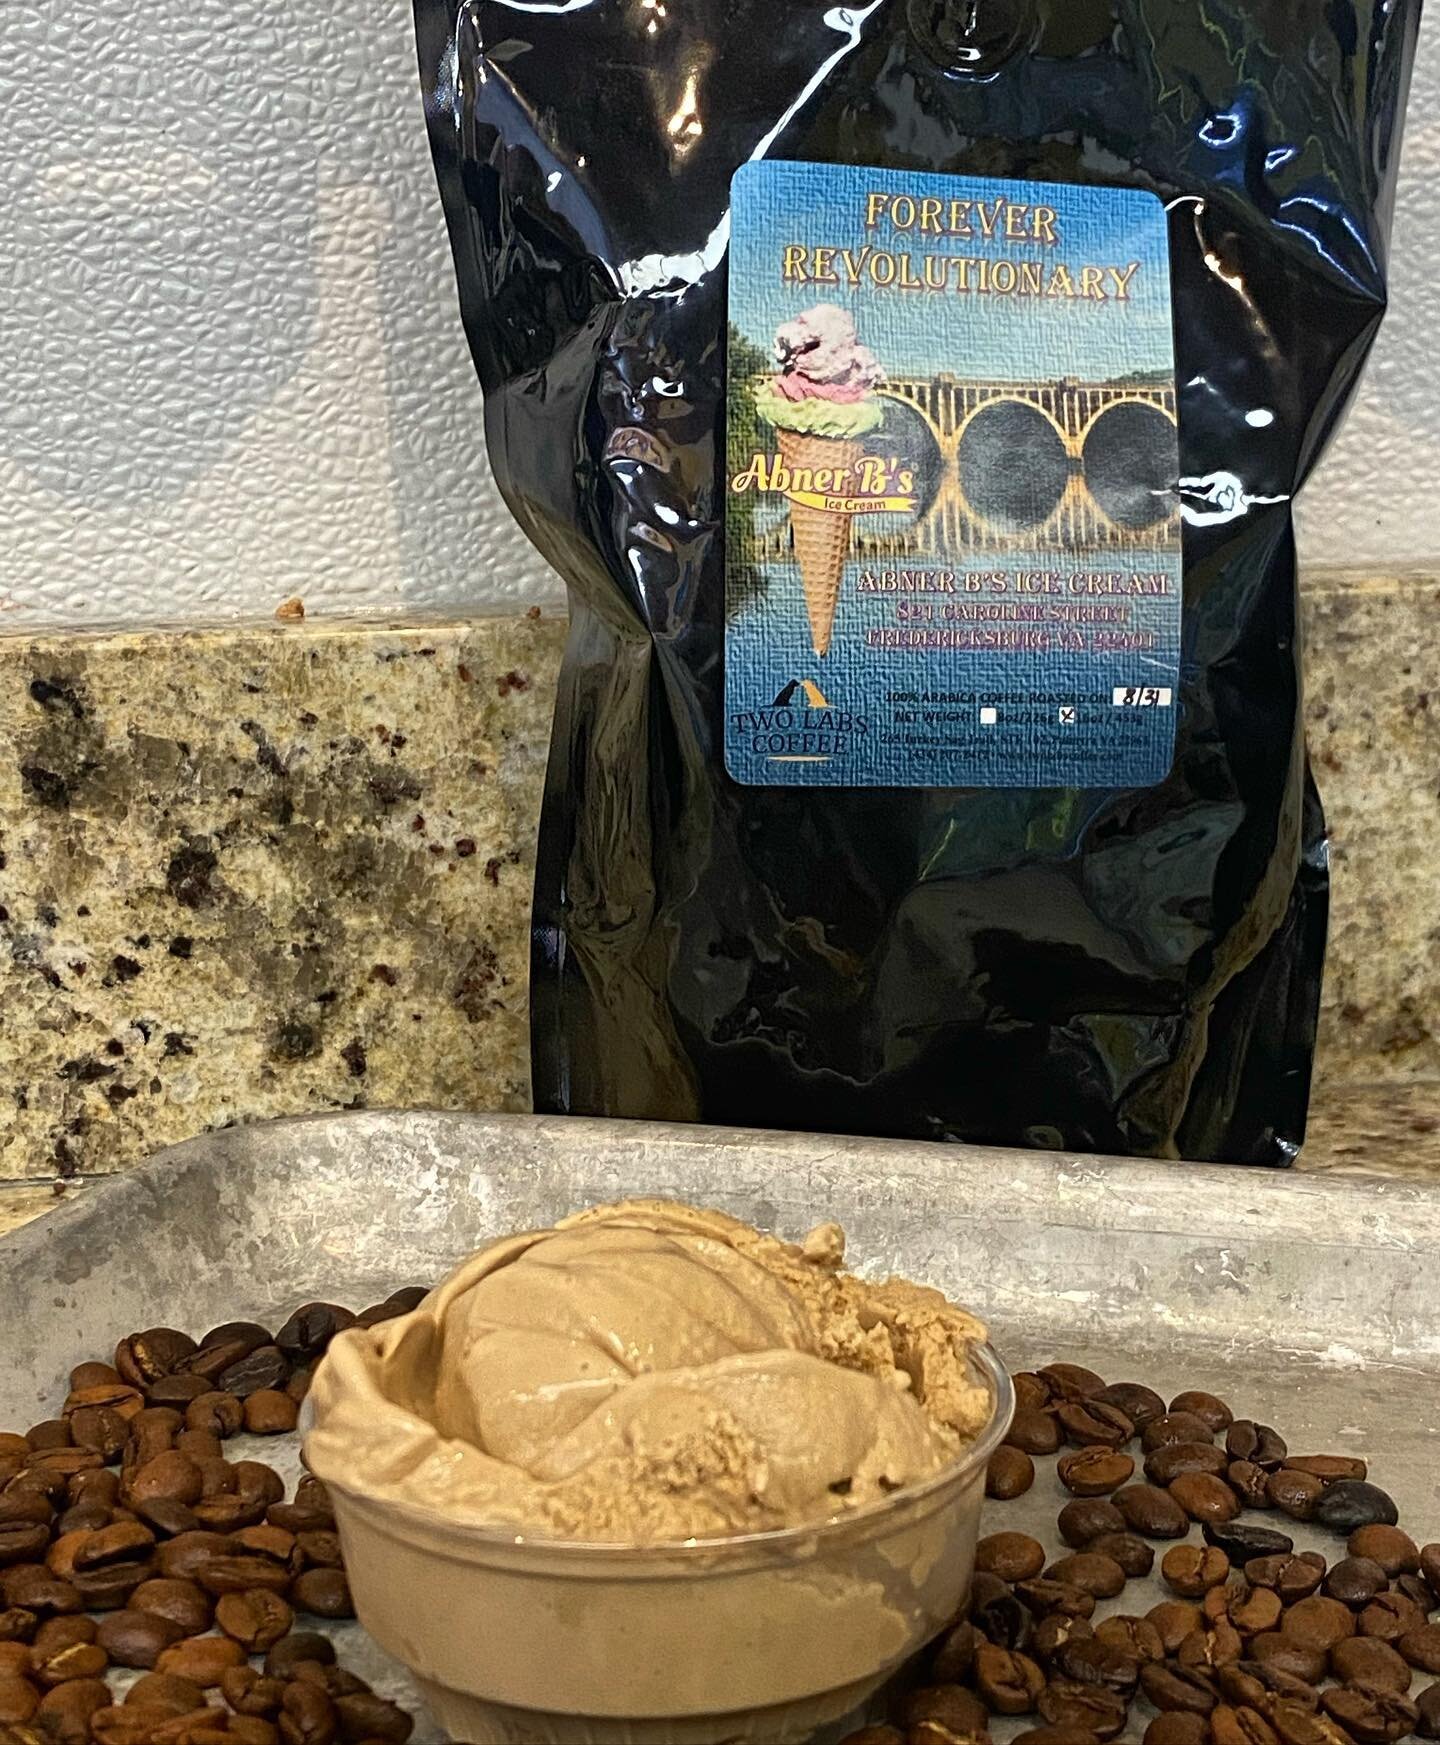 This dark roast flavor is every coffee lovers dream! Ice cream made with real coffee from our partners at Two Labs Coffee. 

#fredericksburg #goodeats #icecream #abnerb #hotcoca #fxbg #coffee #carolinestreet #staffordeats #staffordcounty #shopsmall #